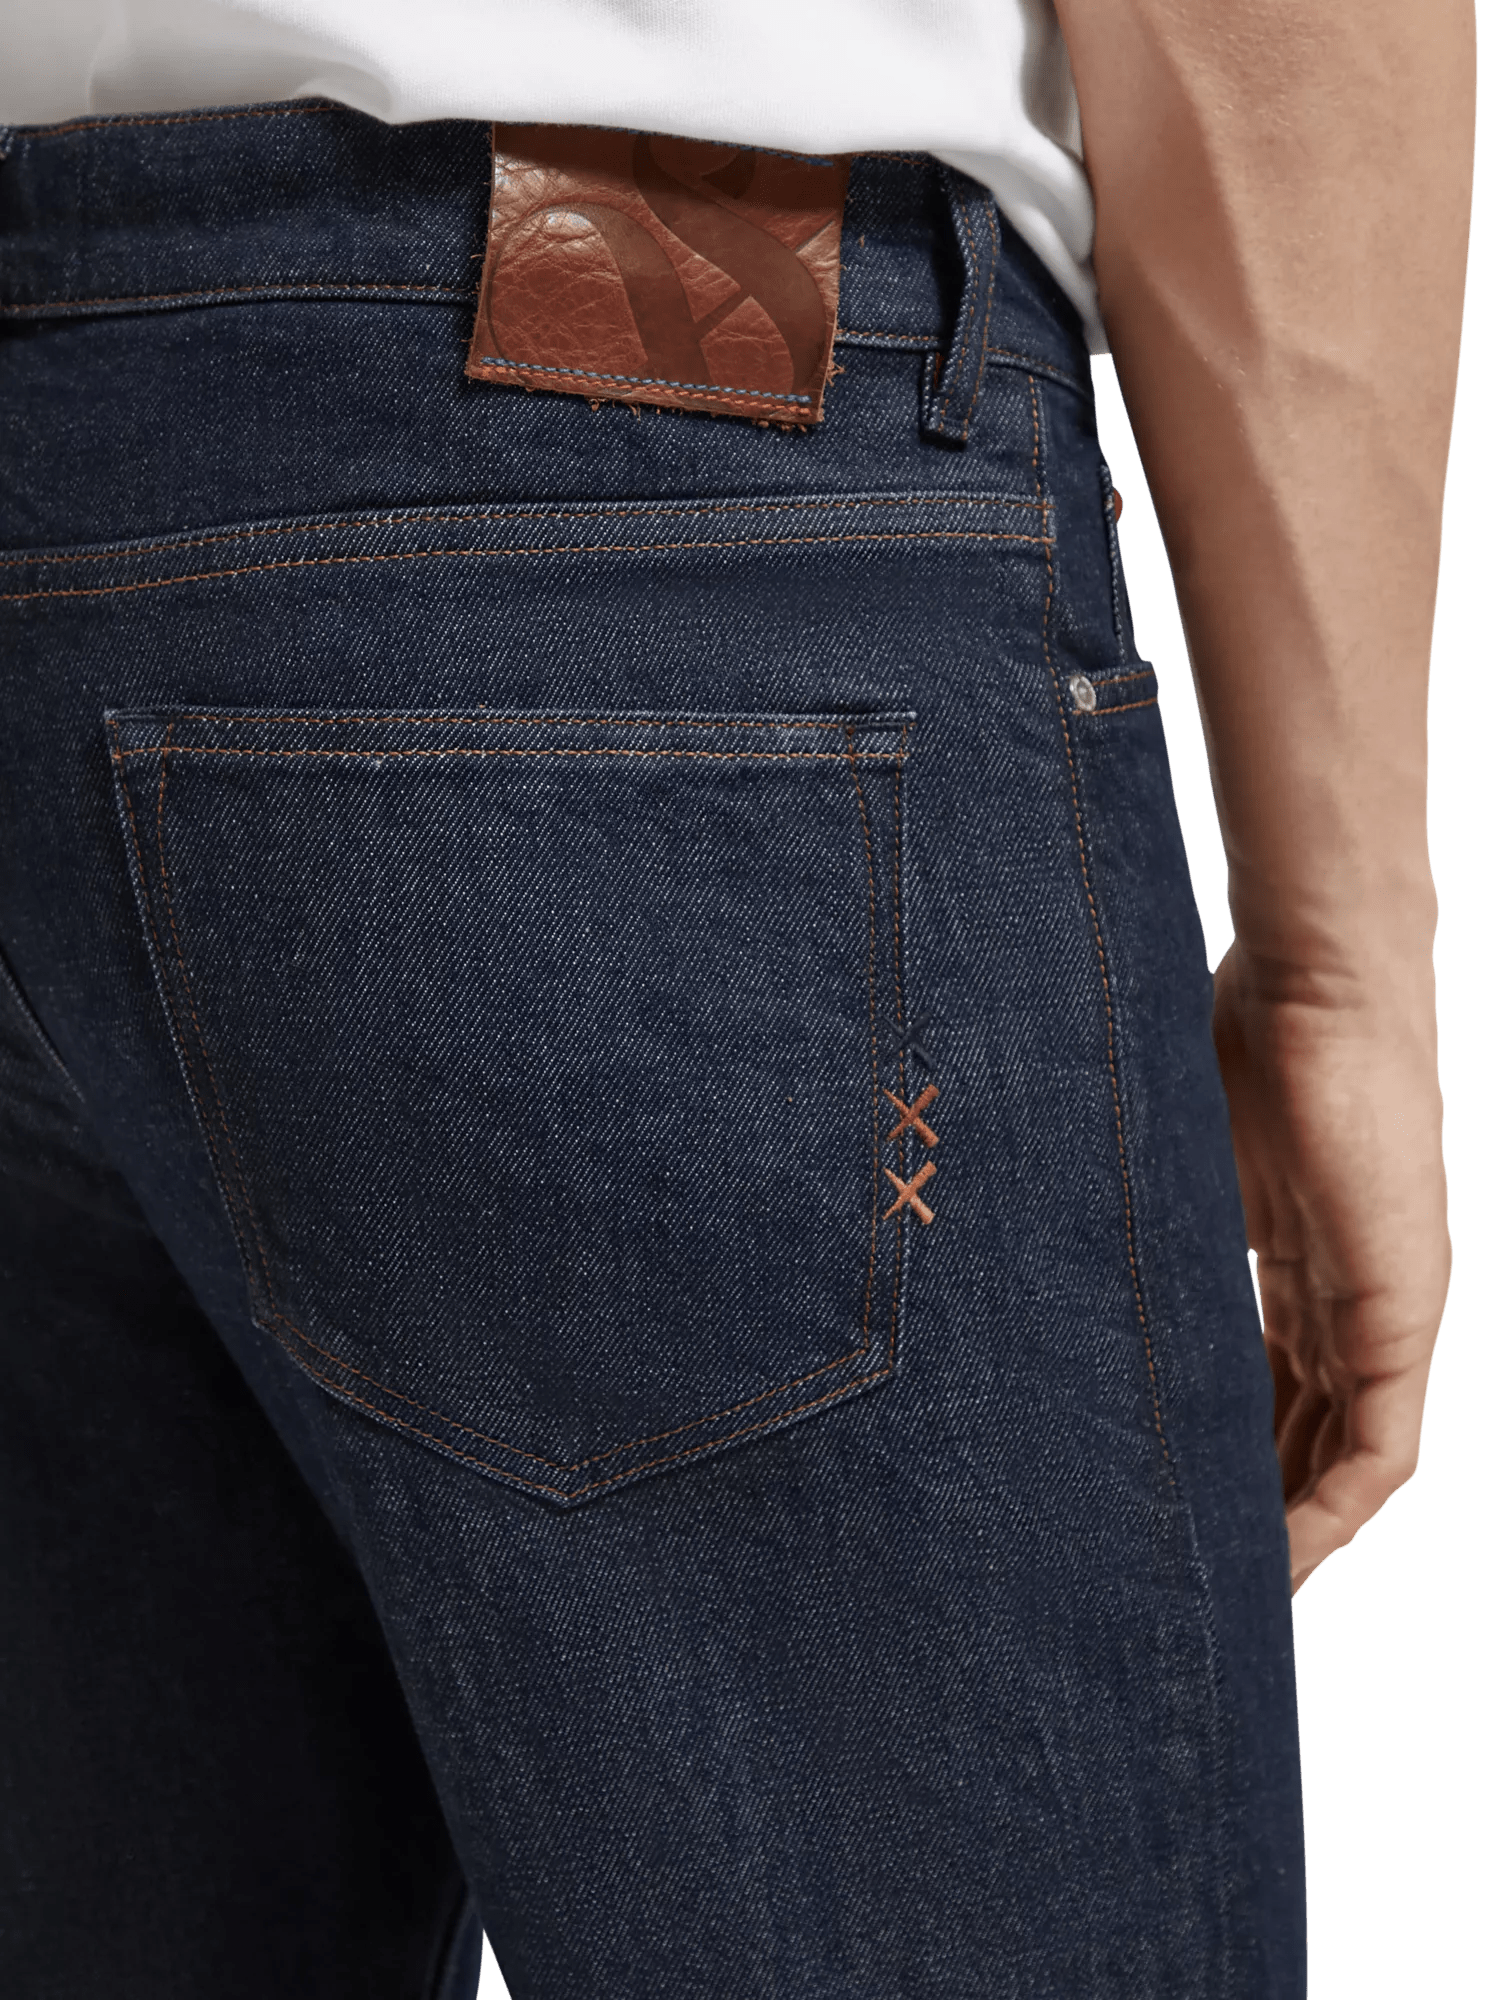 Scotch & Soda - The Drop Tapered Jean - Deep Ink